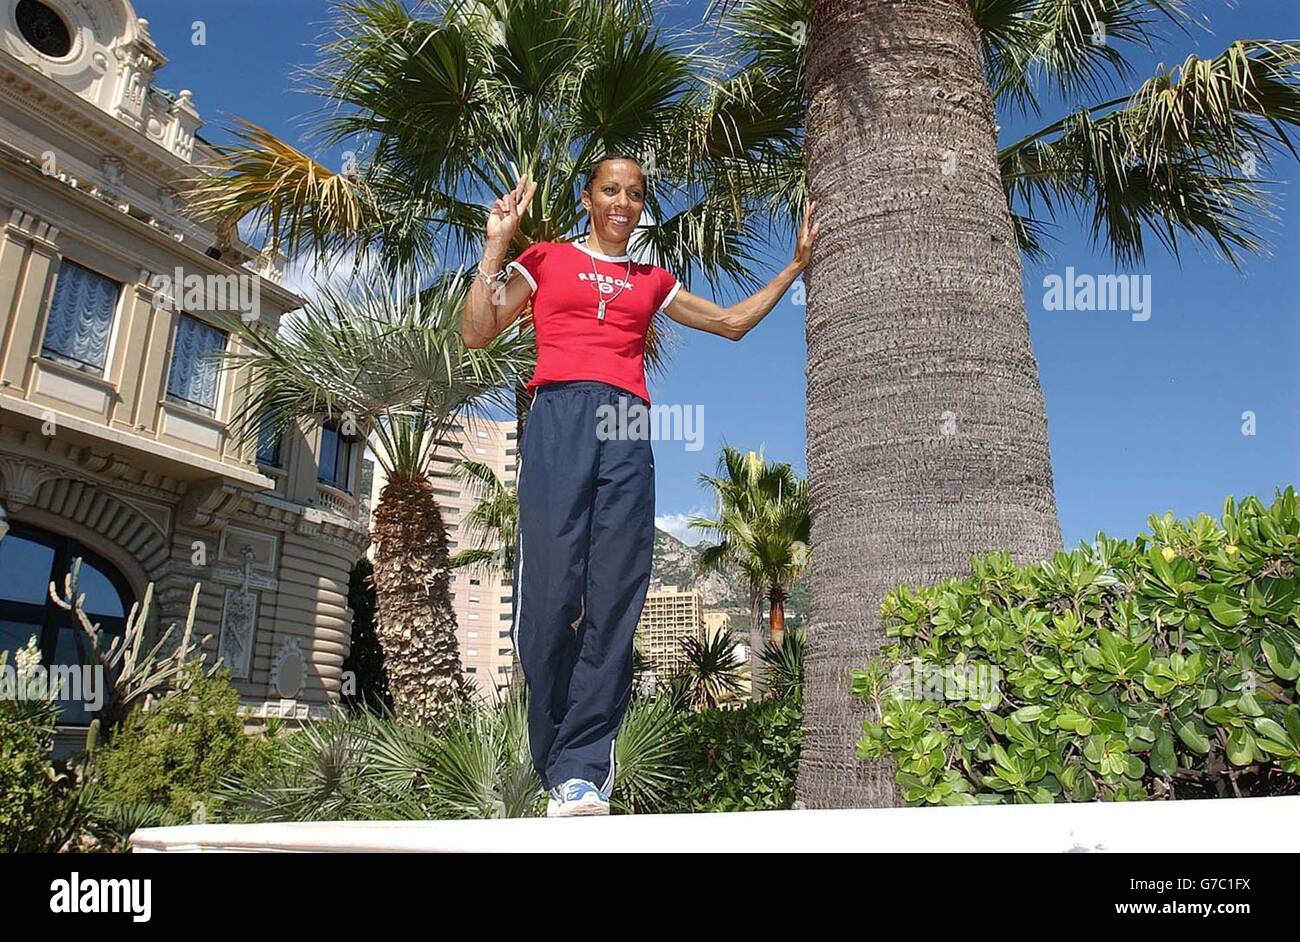 Double Olympic Gold Medal winner Kelly Holmes in Monaco, ahead of the IAAF Comeptition in Monaco tomorrow Saturday 18, where she will compete in the 1500m Event. Stock Photo